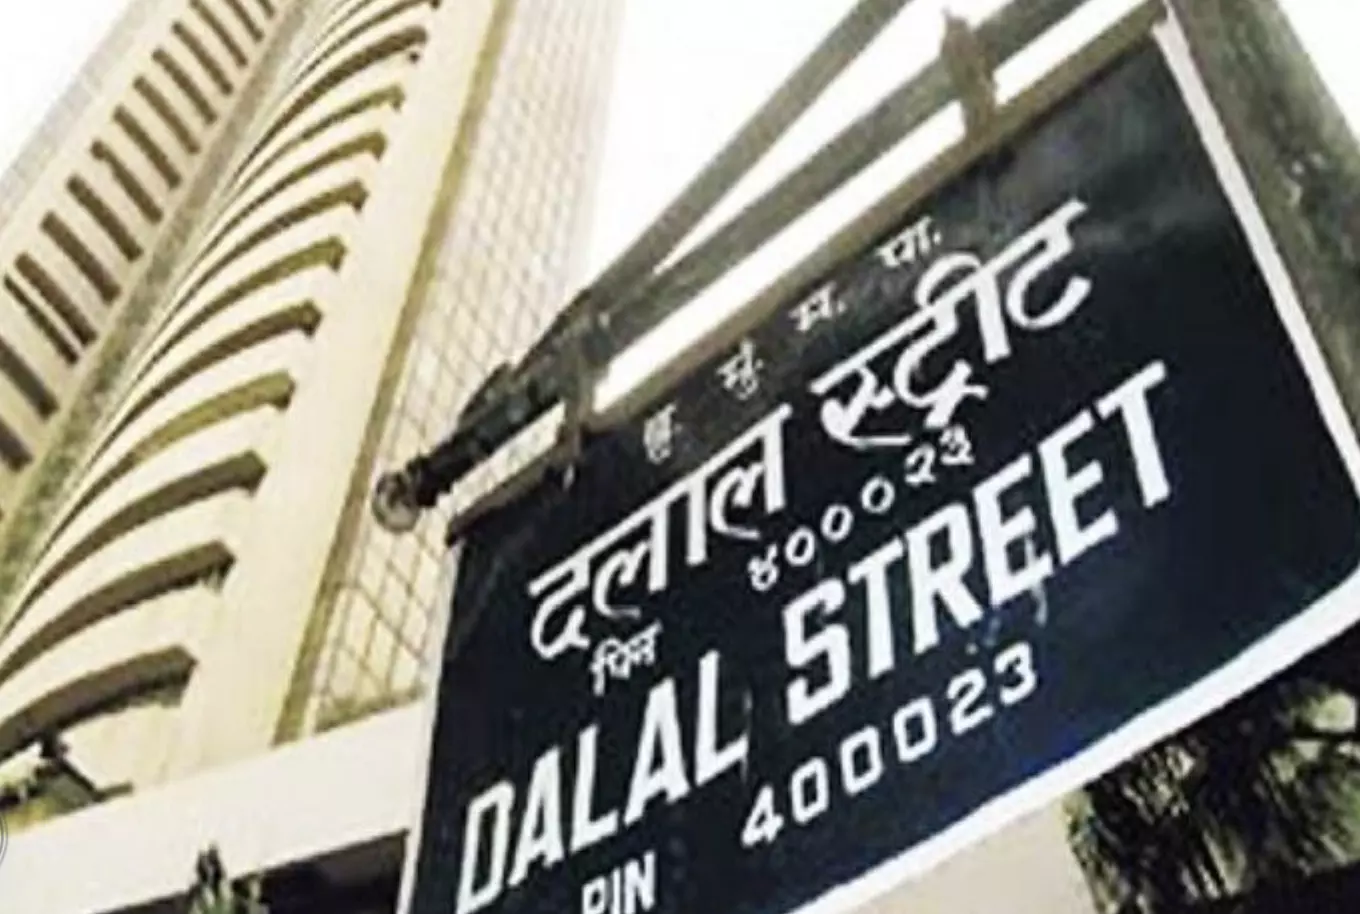 Dalal Street 2023: Tata Motors, Coal India among others shines - a stellar year for the Indian stock market